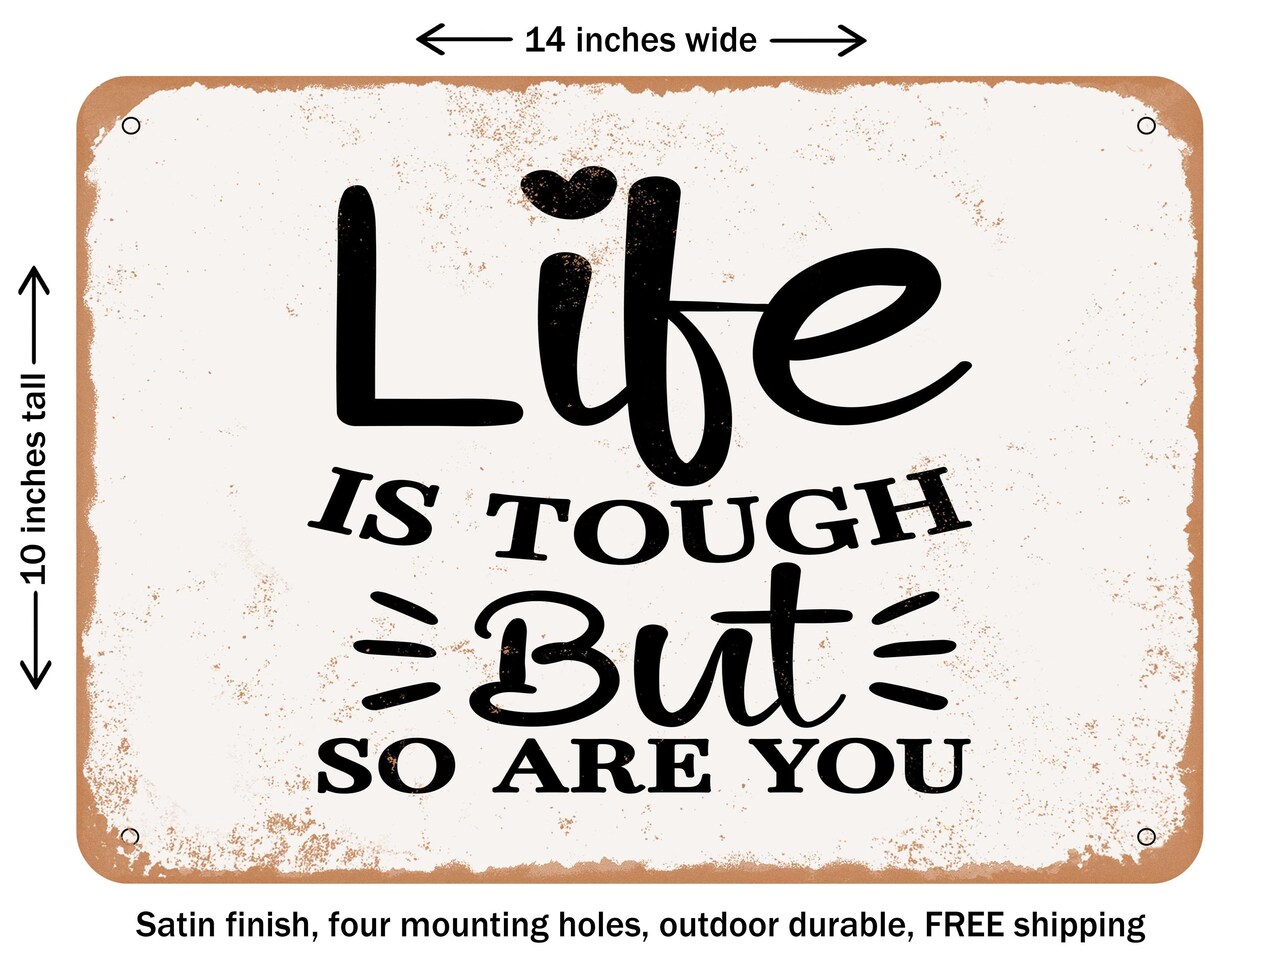 DECORATIVE METAL SIGN - Life is tough But So Are You - Vintage Rusty Look